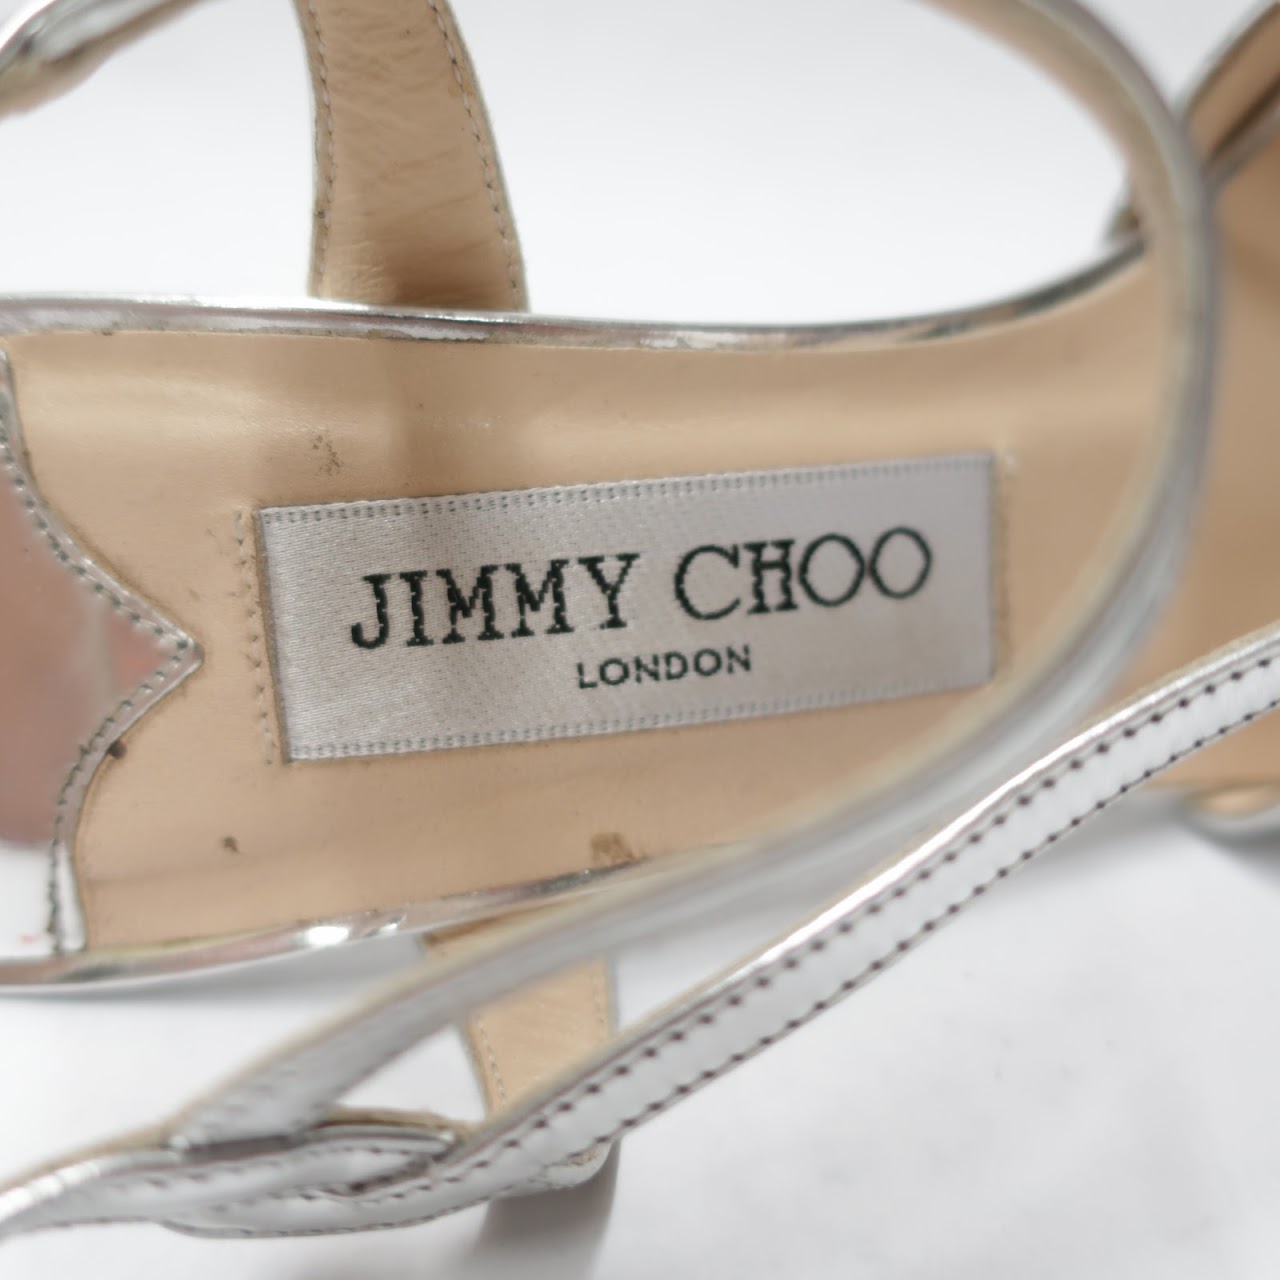 Jimmy Choo Strappy Sandals